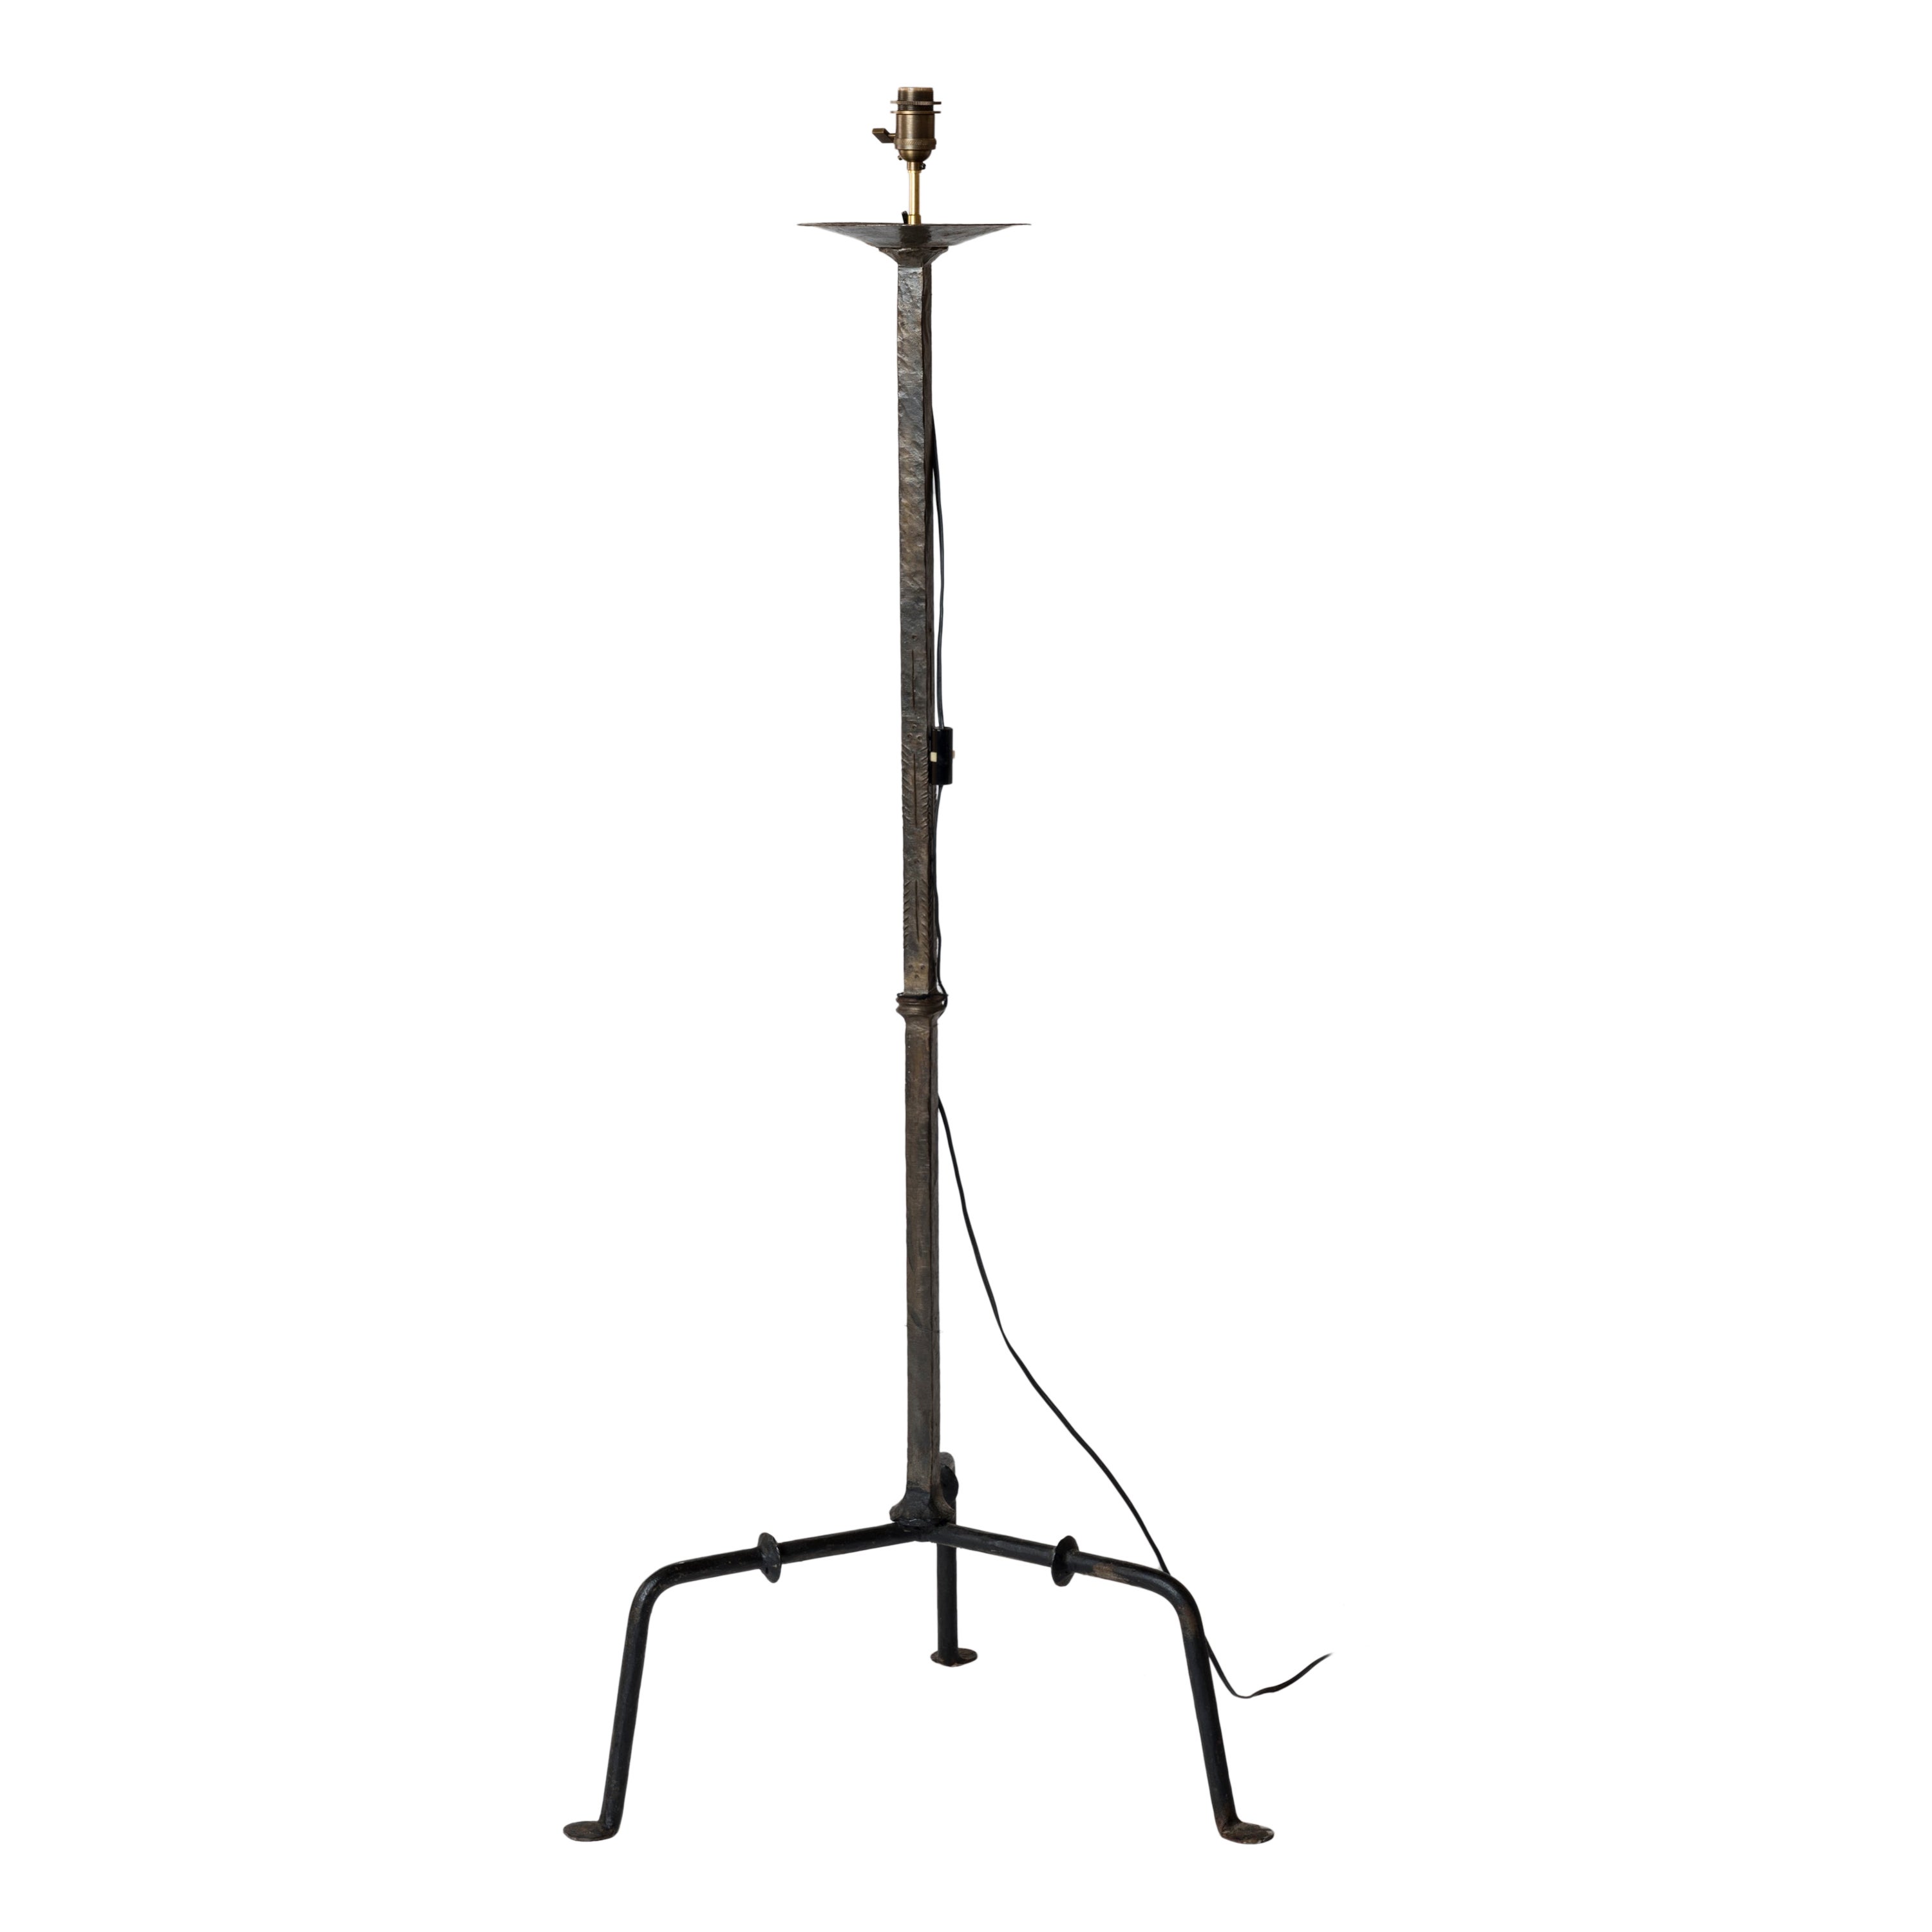 Brutalist Etched Wrought Iron "Ferronerie" Tripod Floor Lamp, France, 1960s